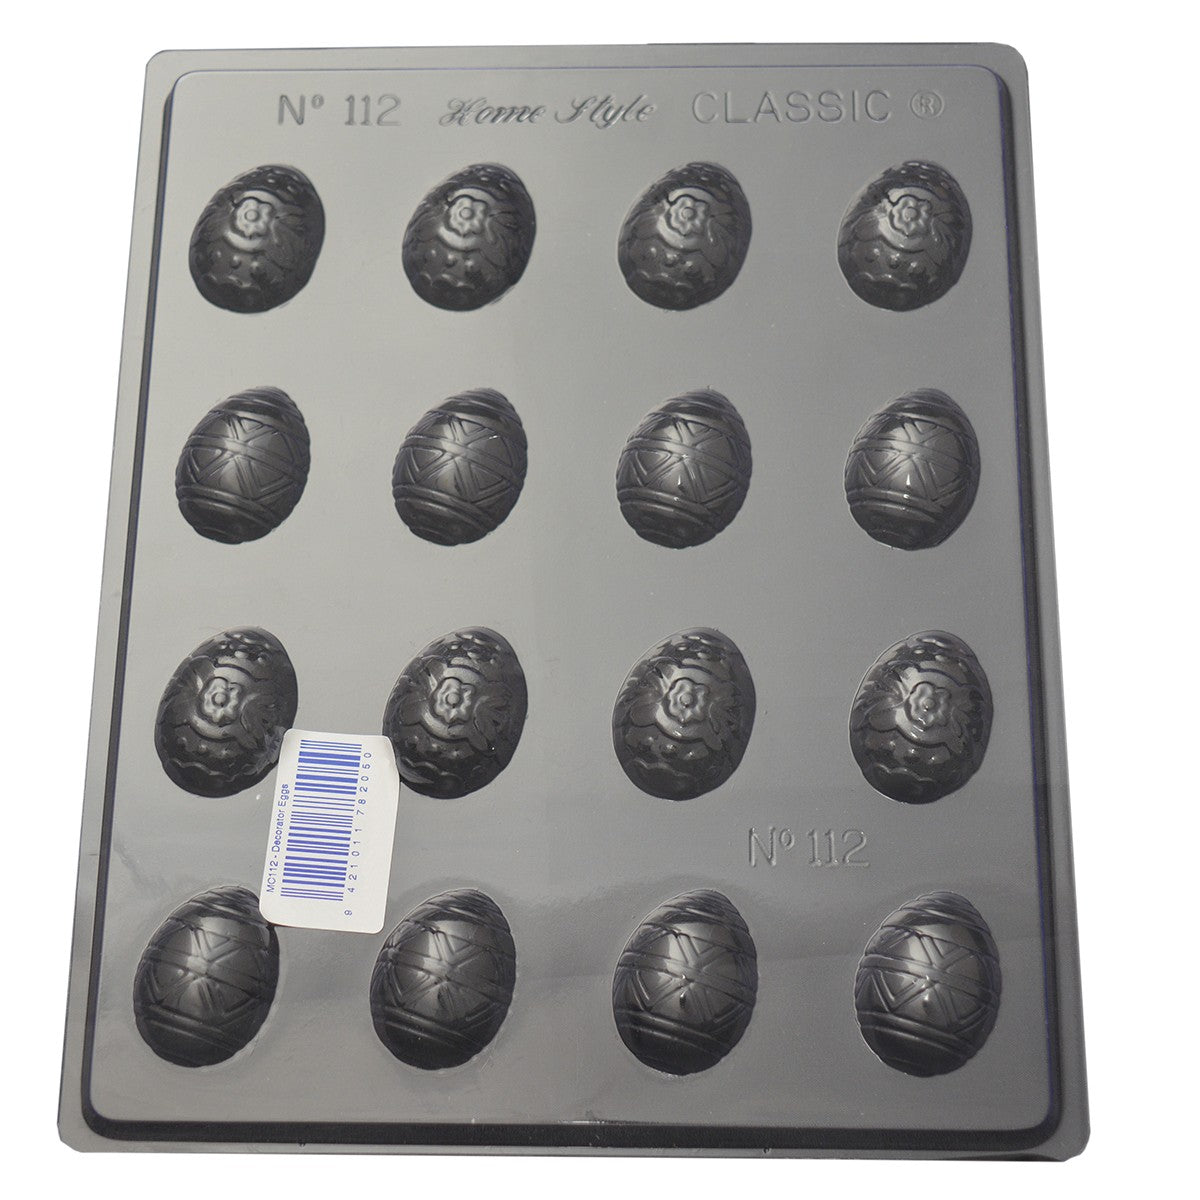 Easter eggs decorator eggs chocolate mould